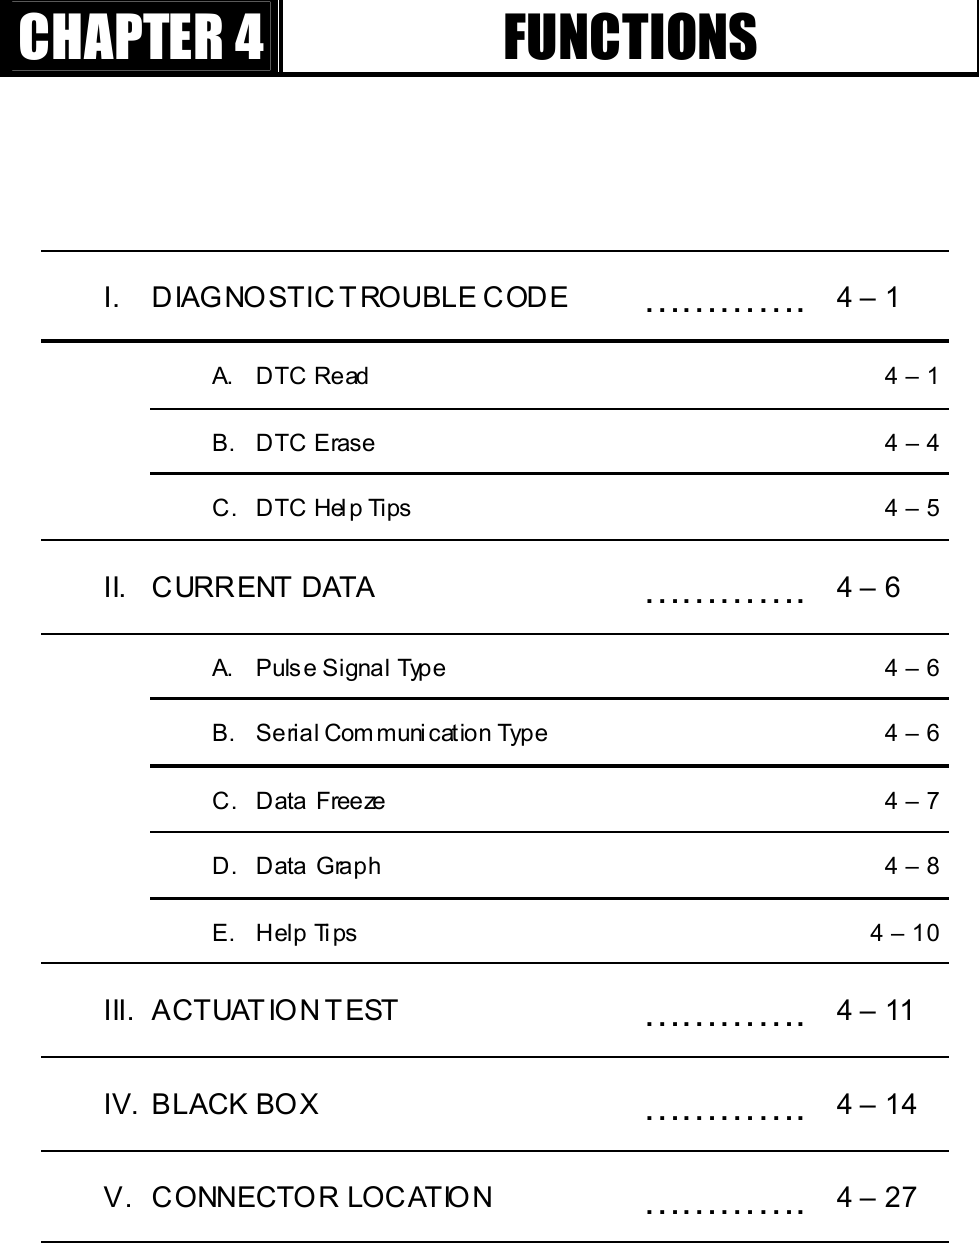 GGٻٻٻٻCHAPTER 4  FUNCTIONS I. DIAGNOSTIC T ROUBLE CODE  ………….  4 – 1   A.  DTC Read    4 – 1   B.  DTC Erase    4 – 4   C.  DTC Help Tips    4 – 5 II. CURRENT DATA   ………….  4 – 6   A.  Pulse Signal Type    4 – 6   B.  Serial Communication Type    4 – 6   C.  Data Freeze    4 – 7   D.  Data Graph    4 – 8   E.  Help Tips    4 – 10 III. ACTUAT ION TEST  ………….  4 – 11 IV. BLACK BOX  ………….  4 – 14 V. CONNECTOR LOCATION  ………….  4 – 27 G